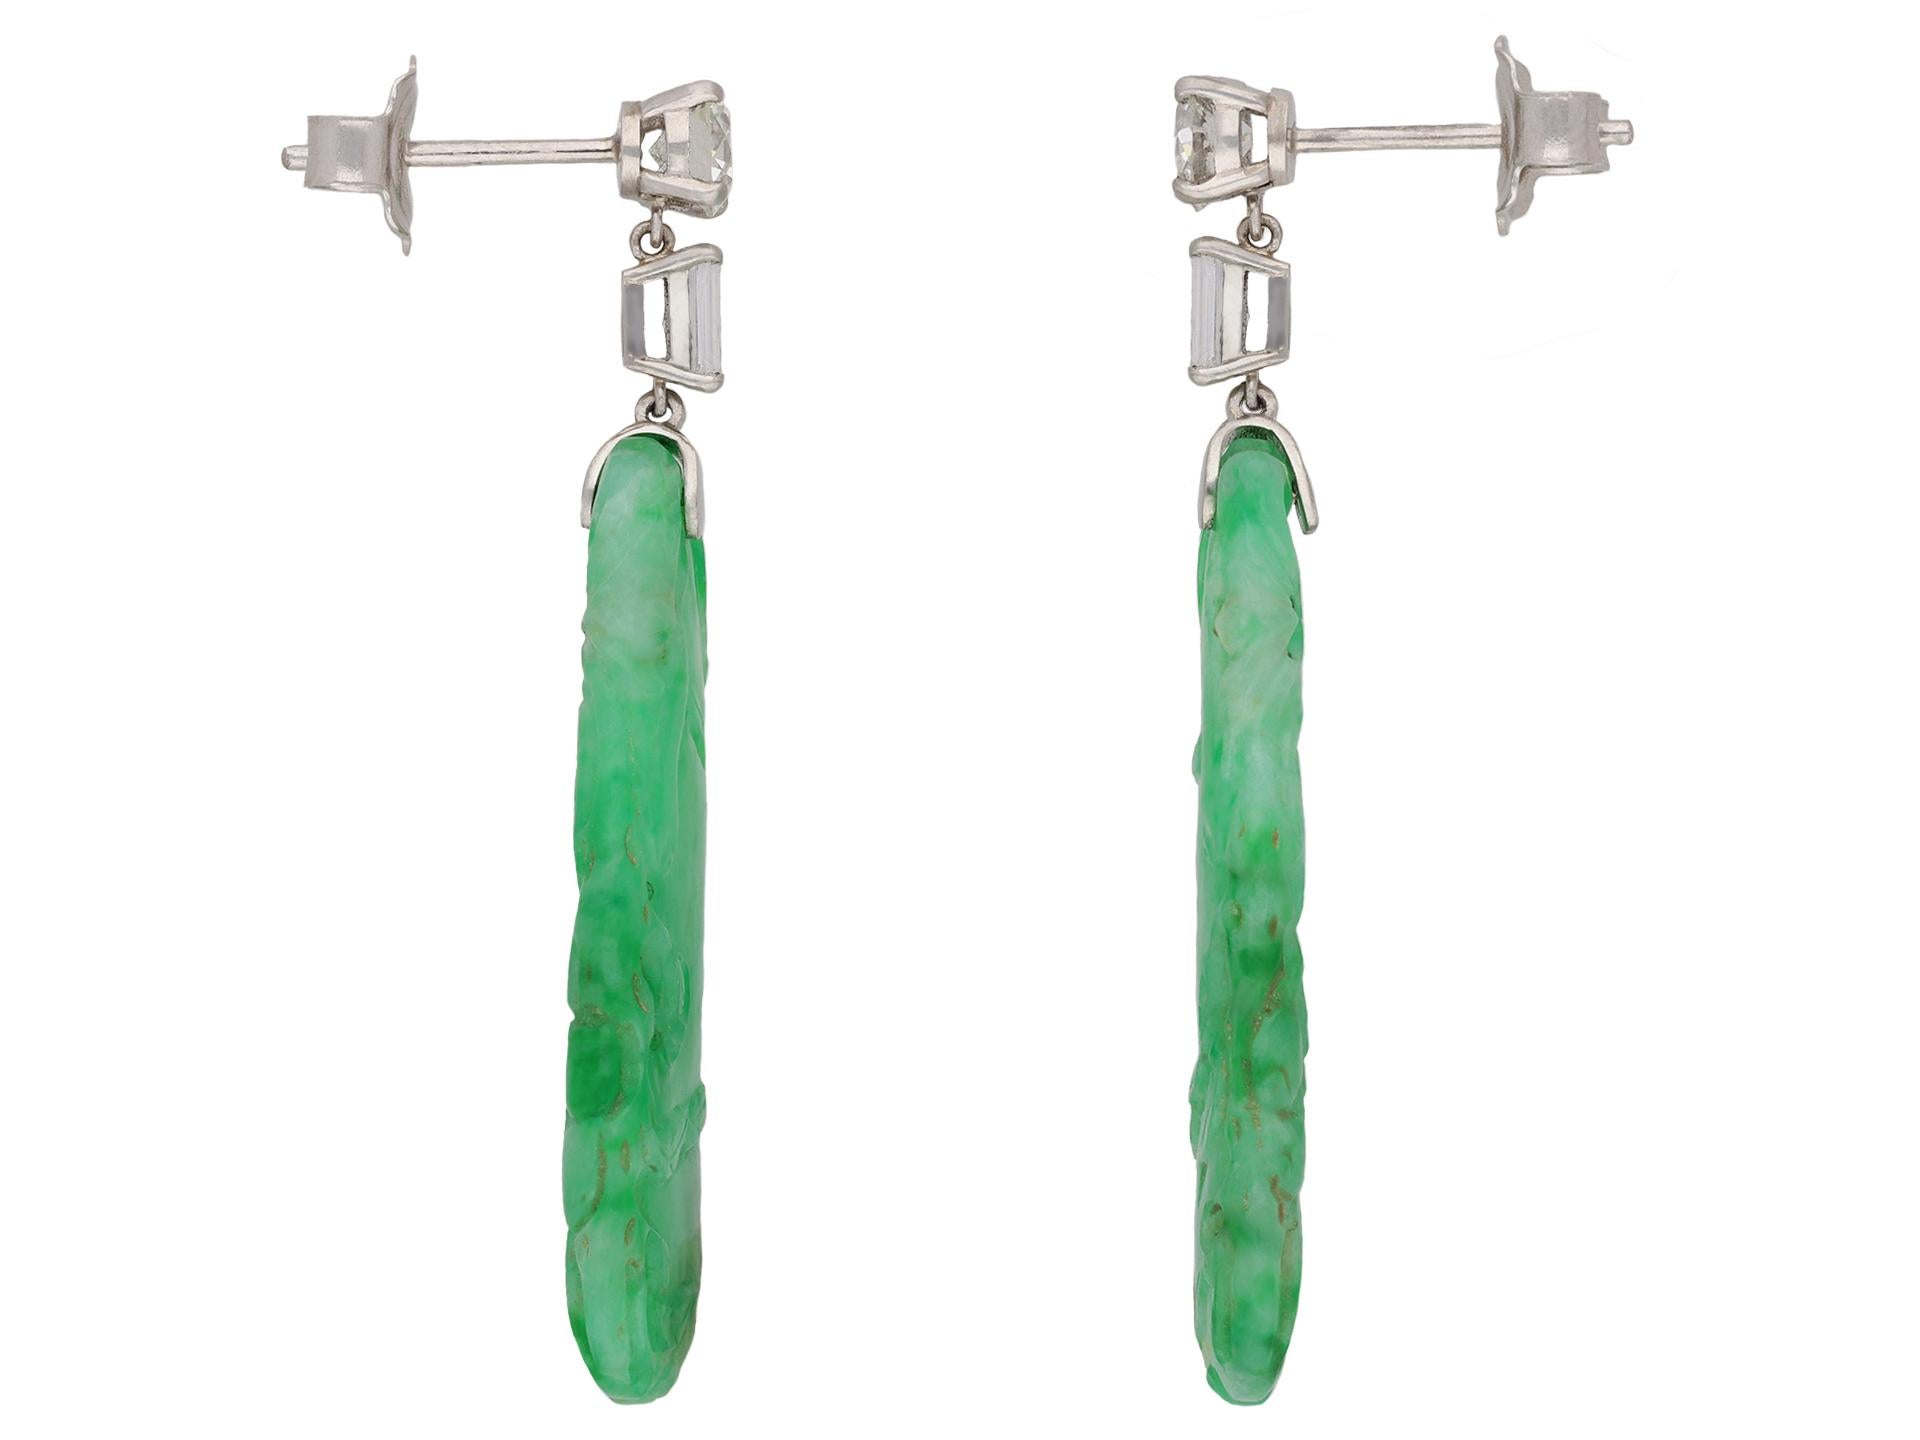 Art Deco diamond and jade earrings. A matching pair of earrings, each set with one round old cut diamond in an open back claw setting, two in total, with a combined approximate weight of 0.80 carats, suspending one rectangular baguette cut diamond